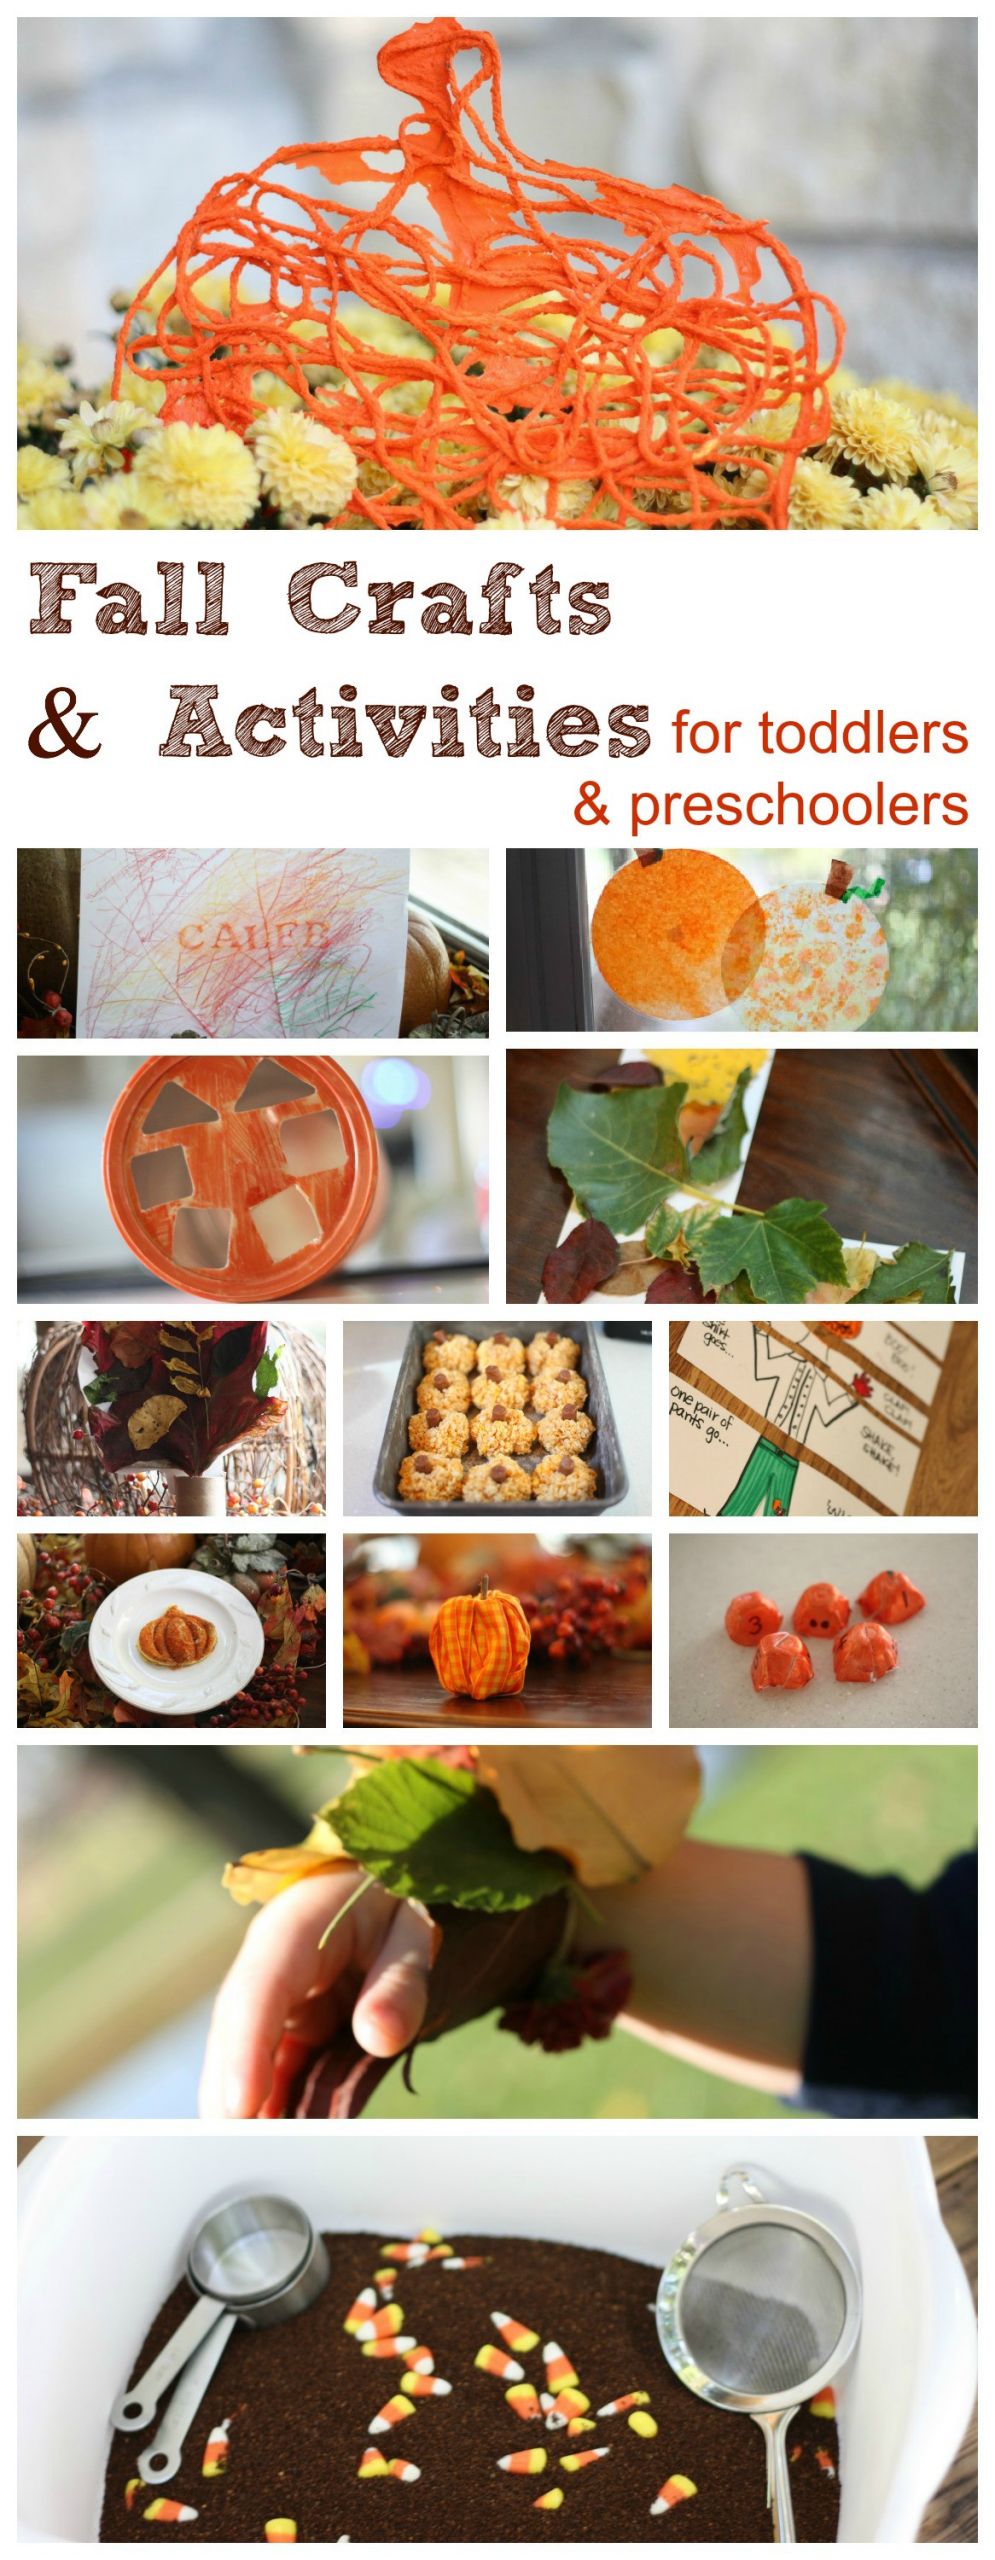 Crafts And Activities For Toddlers
 Fall Crafts and Activities for Preschoolers and Toddlers